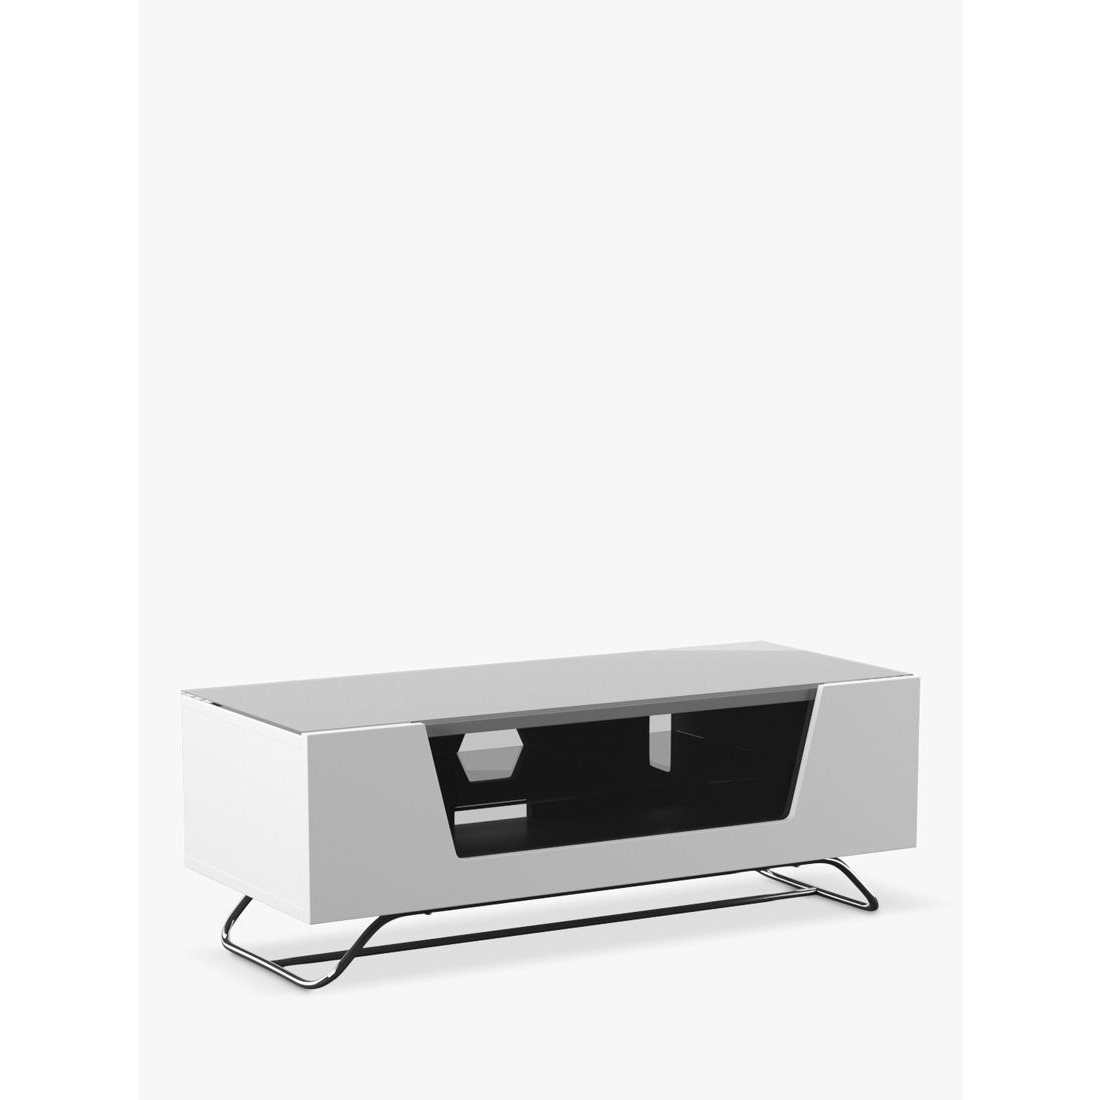 "Alphason Chromium 2 1000mm TV Stand for TVs up to 45""" - image 1